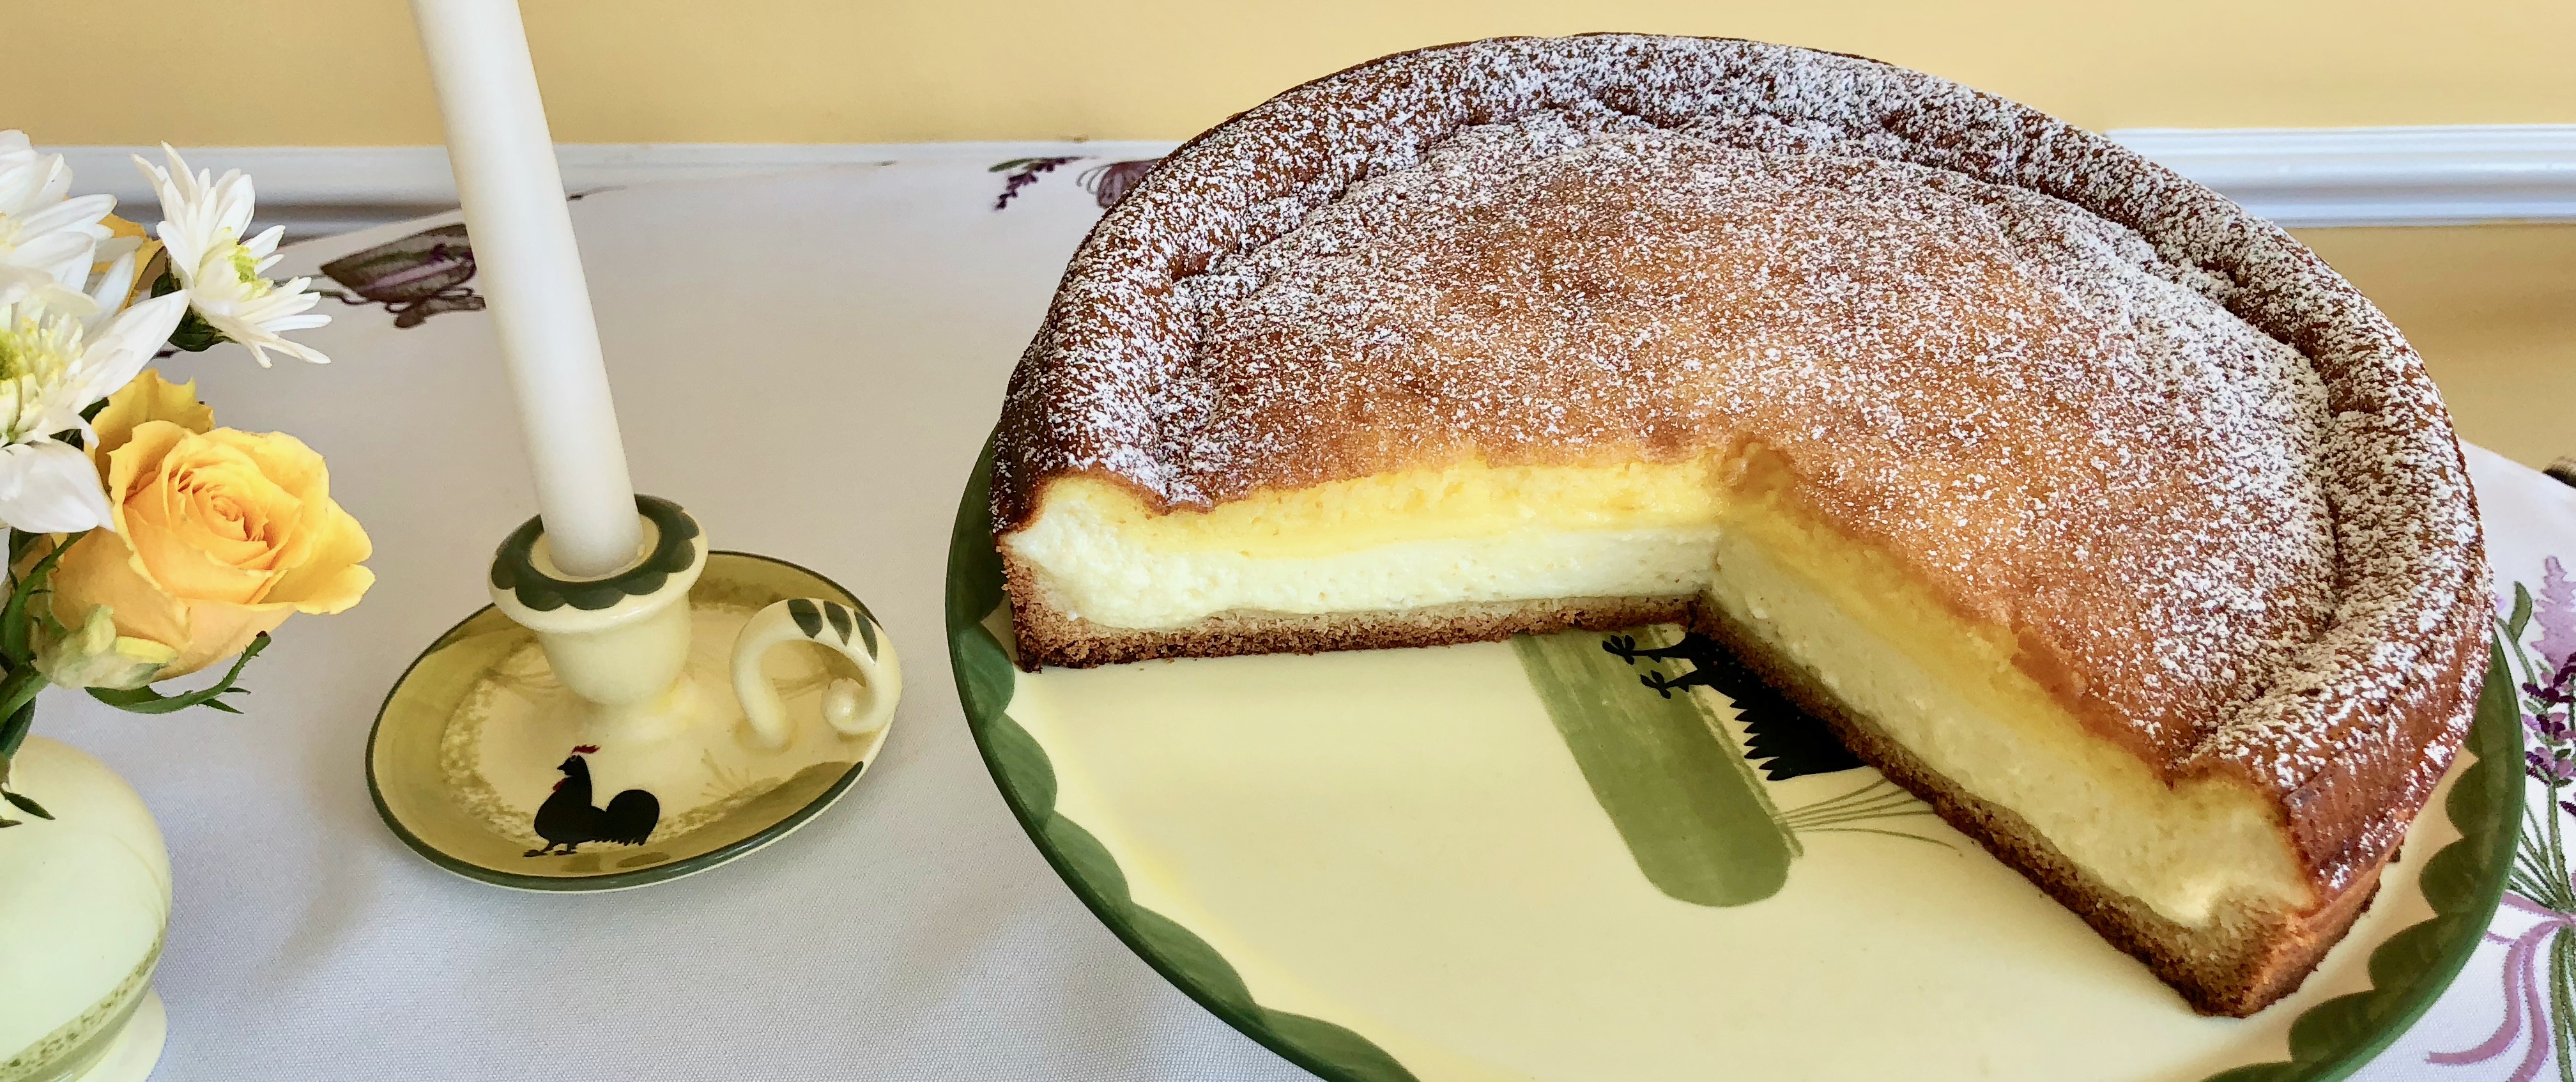 Dresdner Eierschecke Recipe | Specialty from Saxony and Thuringia